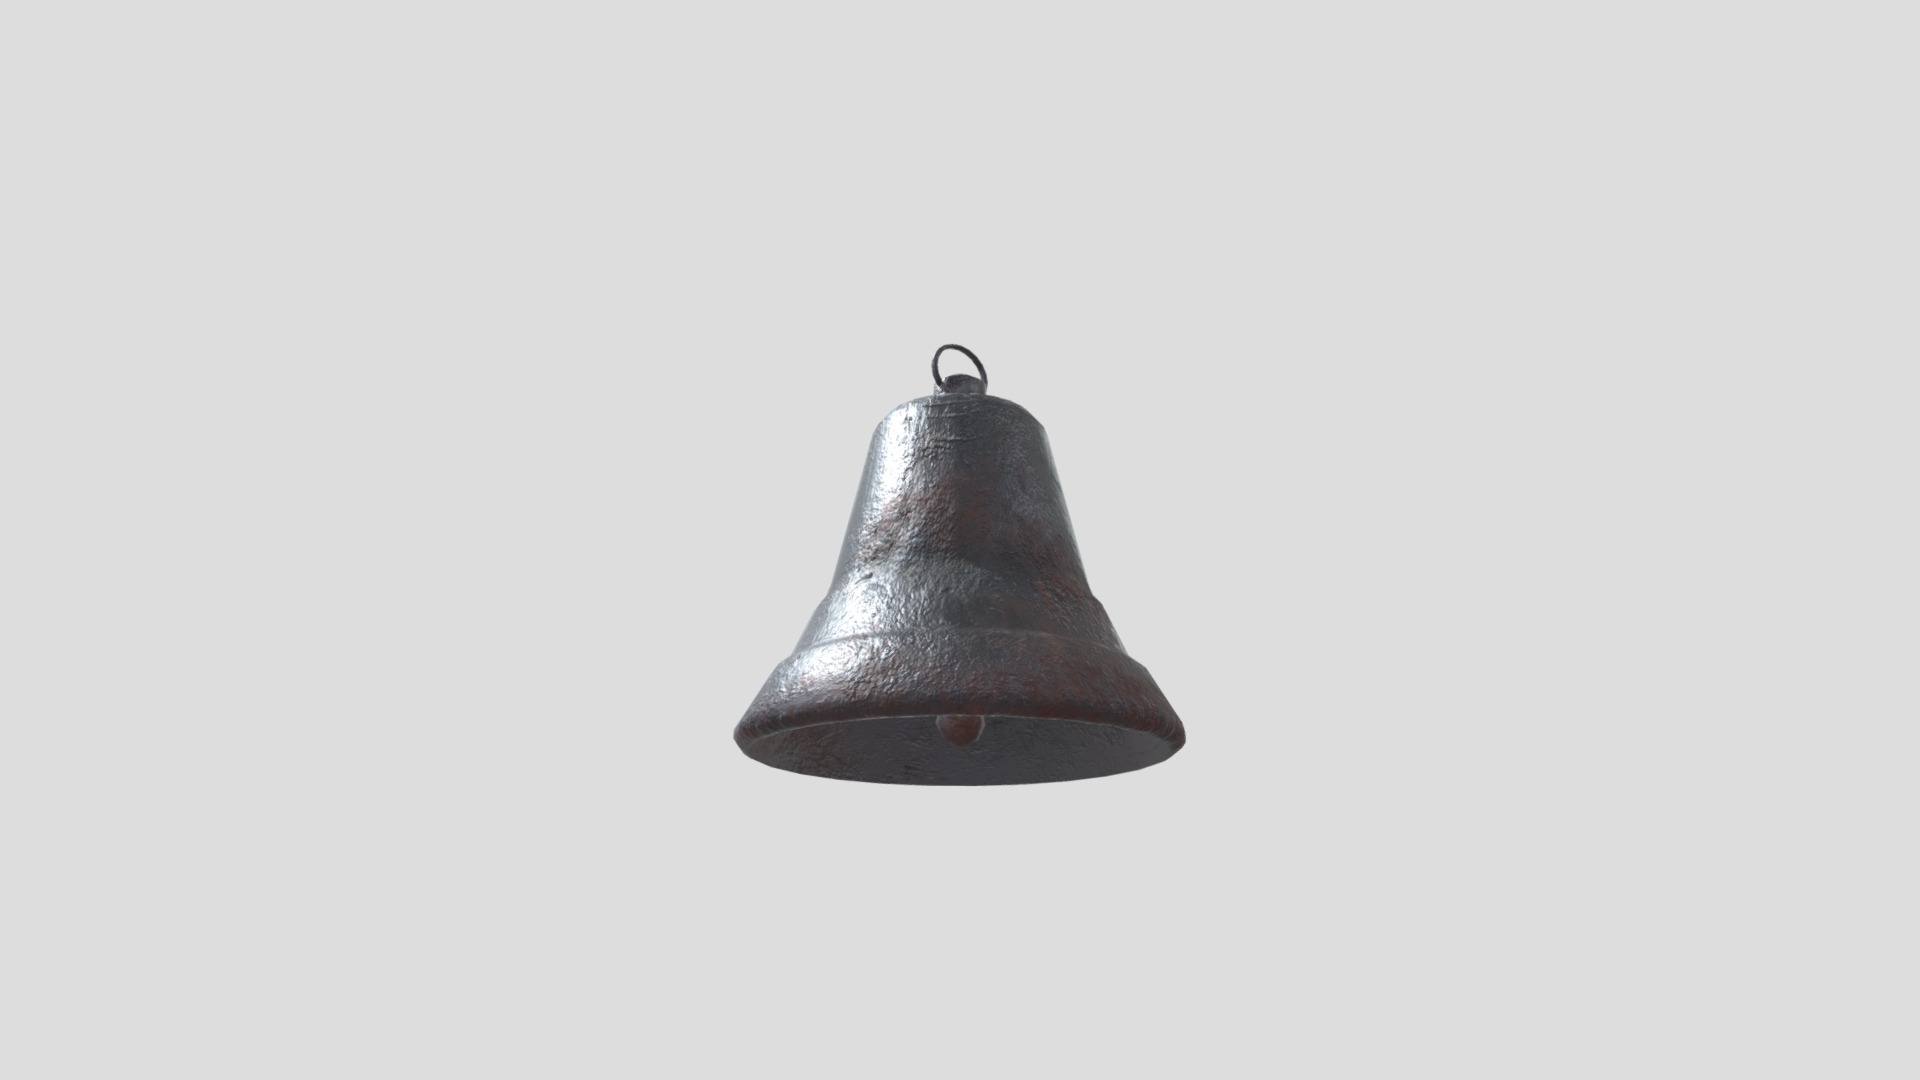 3D model Old Rusty Bell - This is a 3D model of the Old Rusty Bell. The 3D model is about a black bell on a white background.